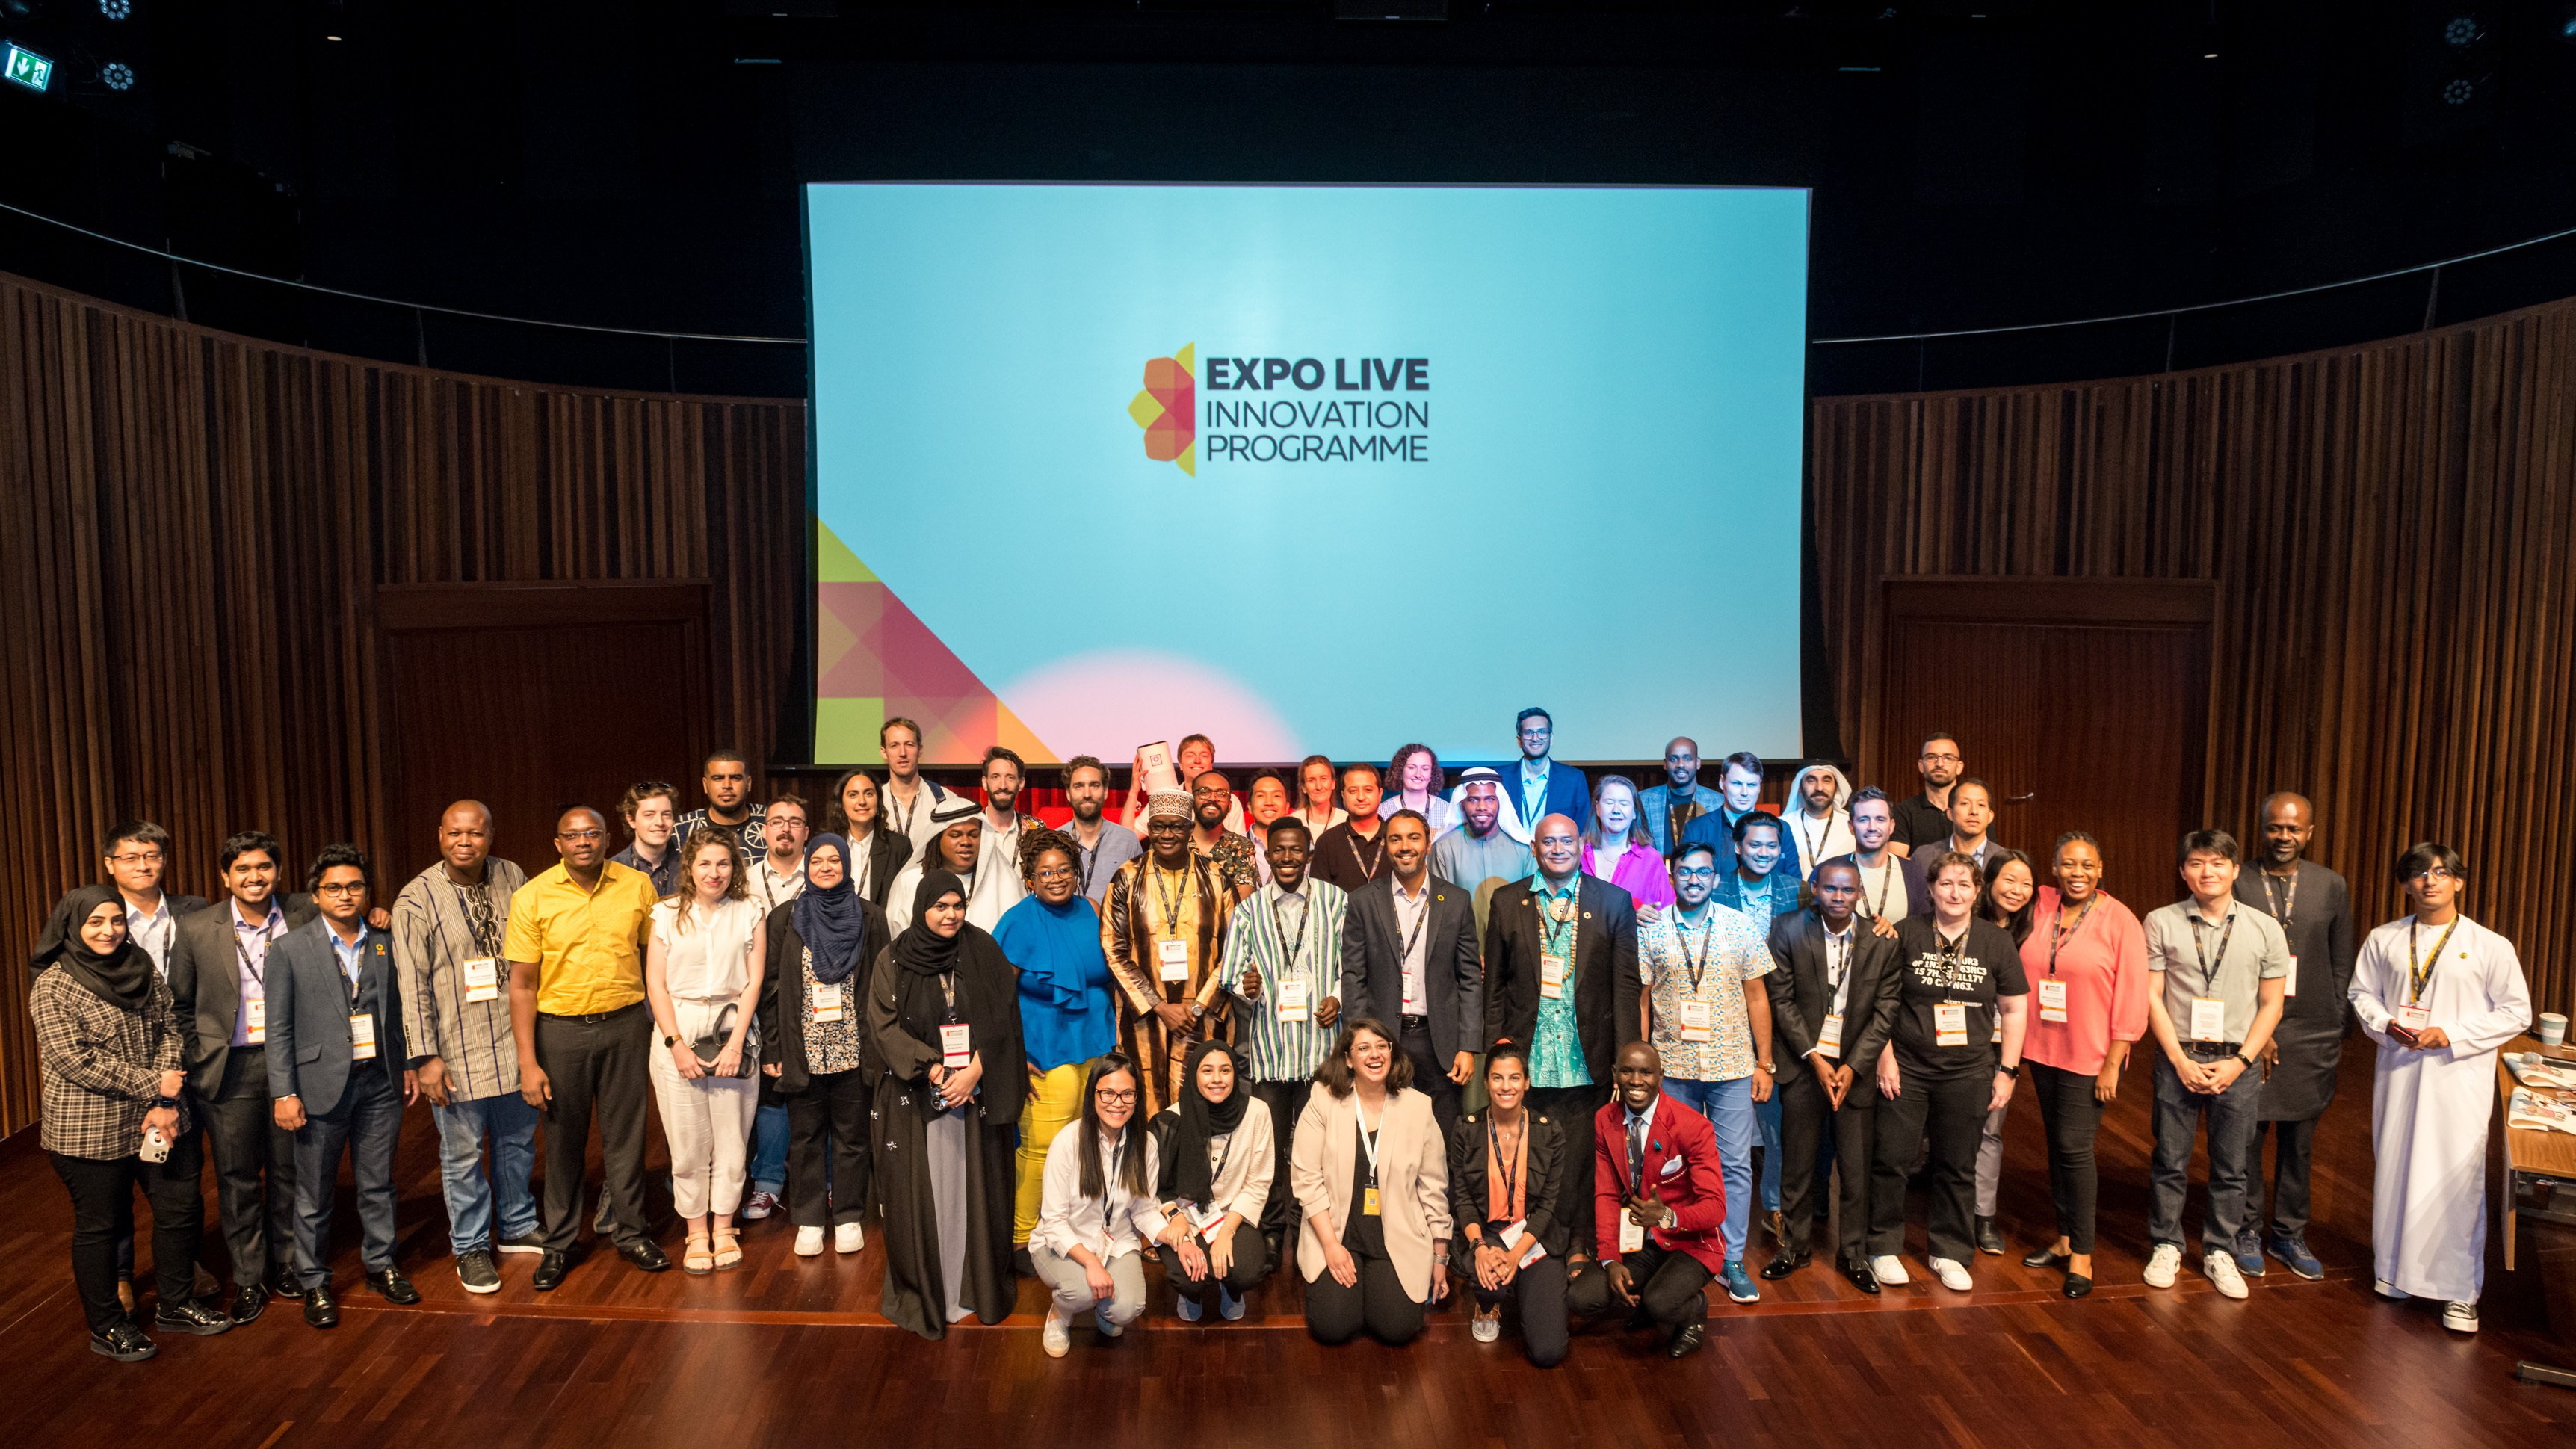 A group photo, about 60 people. Behind them a large screen showing the logo of the Expo Live Innovation Programme.